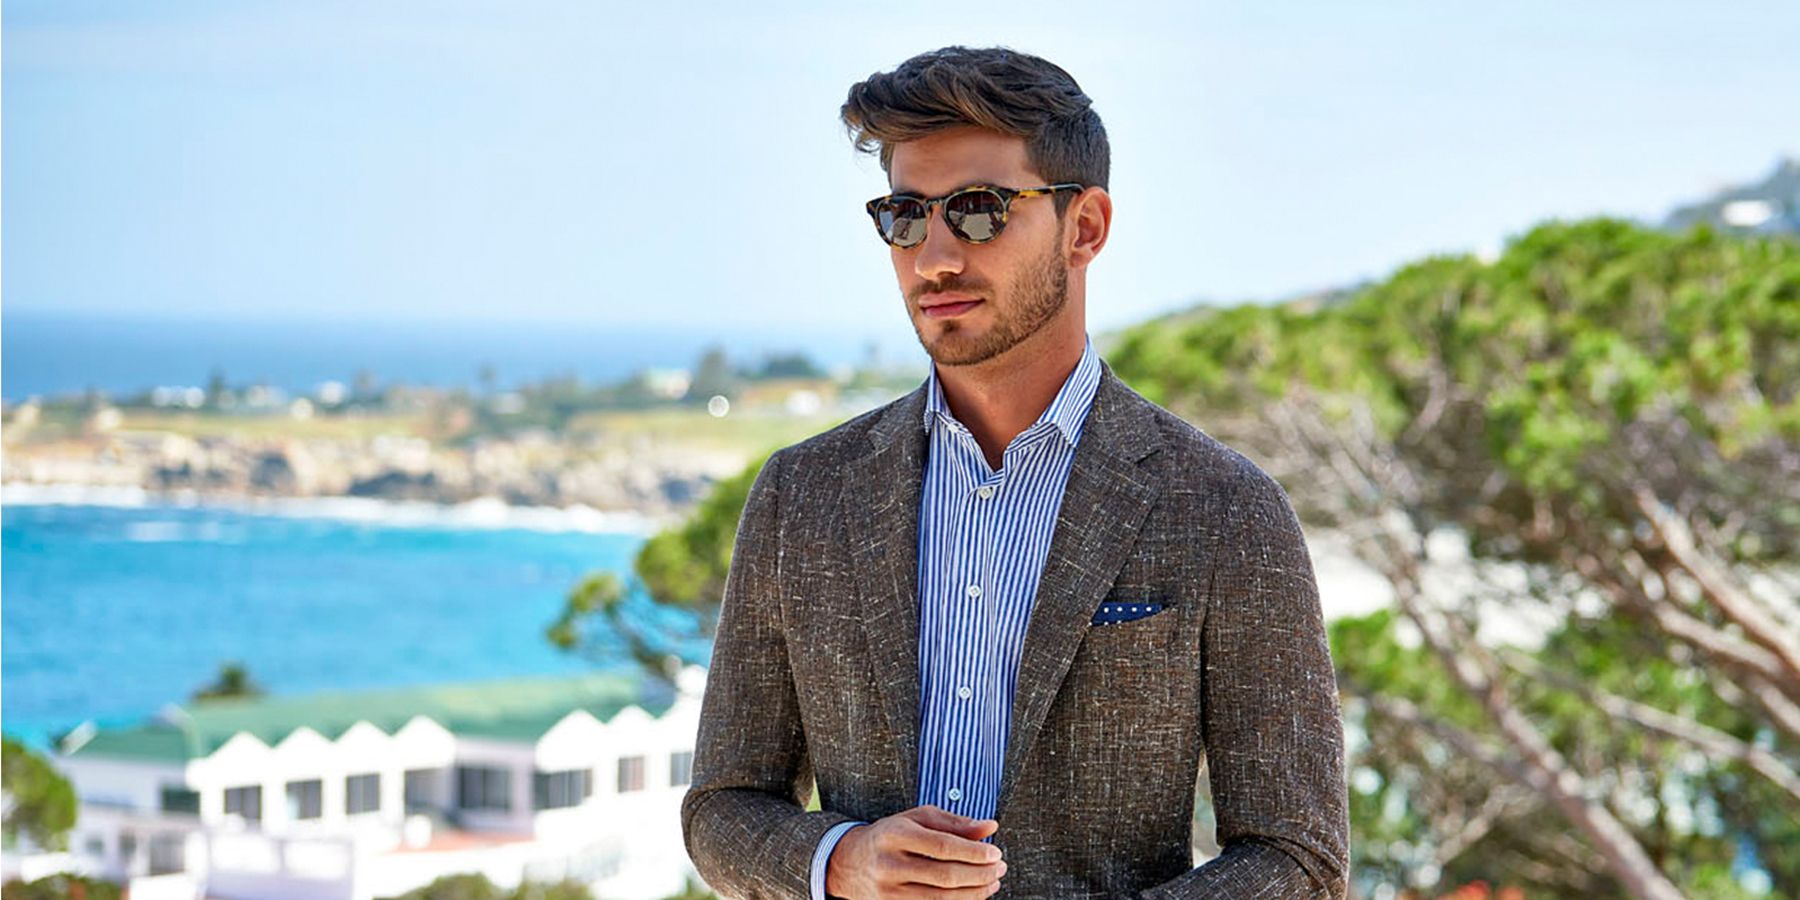 How To Button Your Suit Jacket The Right Way